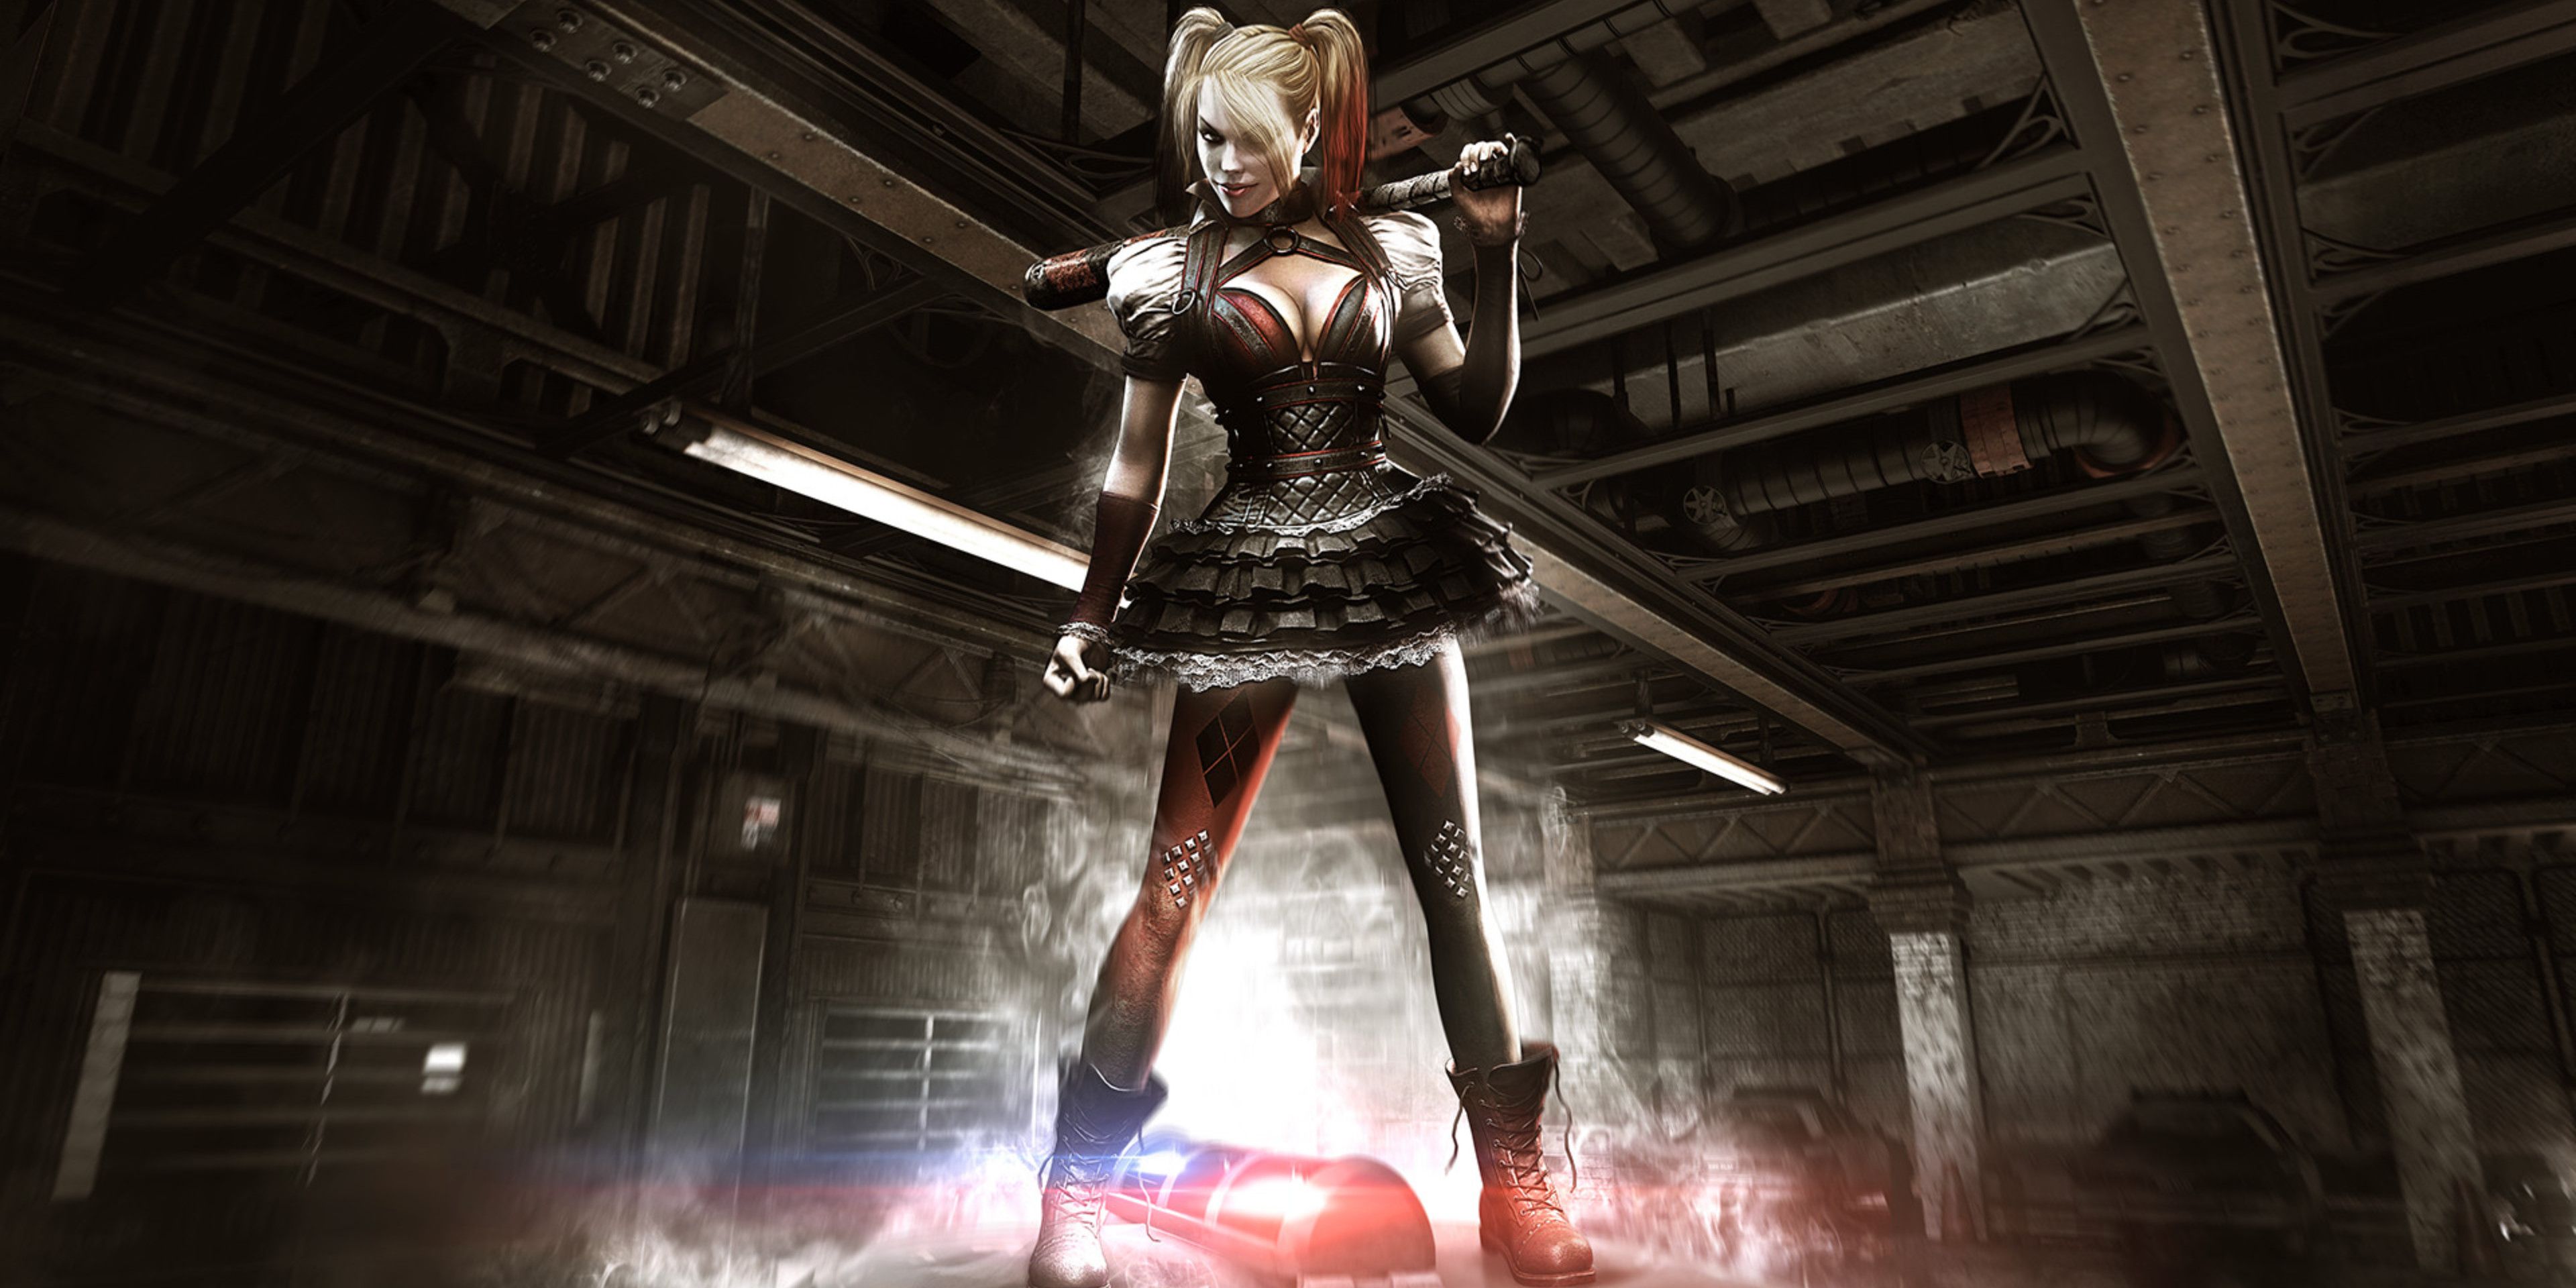 Harley Quinn in her Arkham Knight outfit standing on top of a police car with a bat in her hand